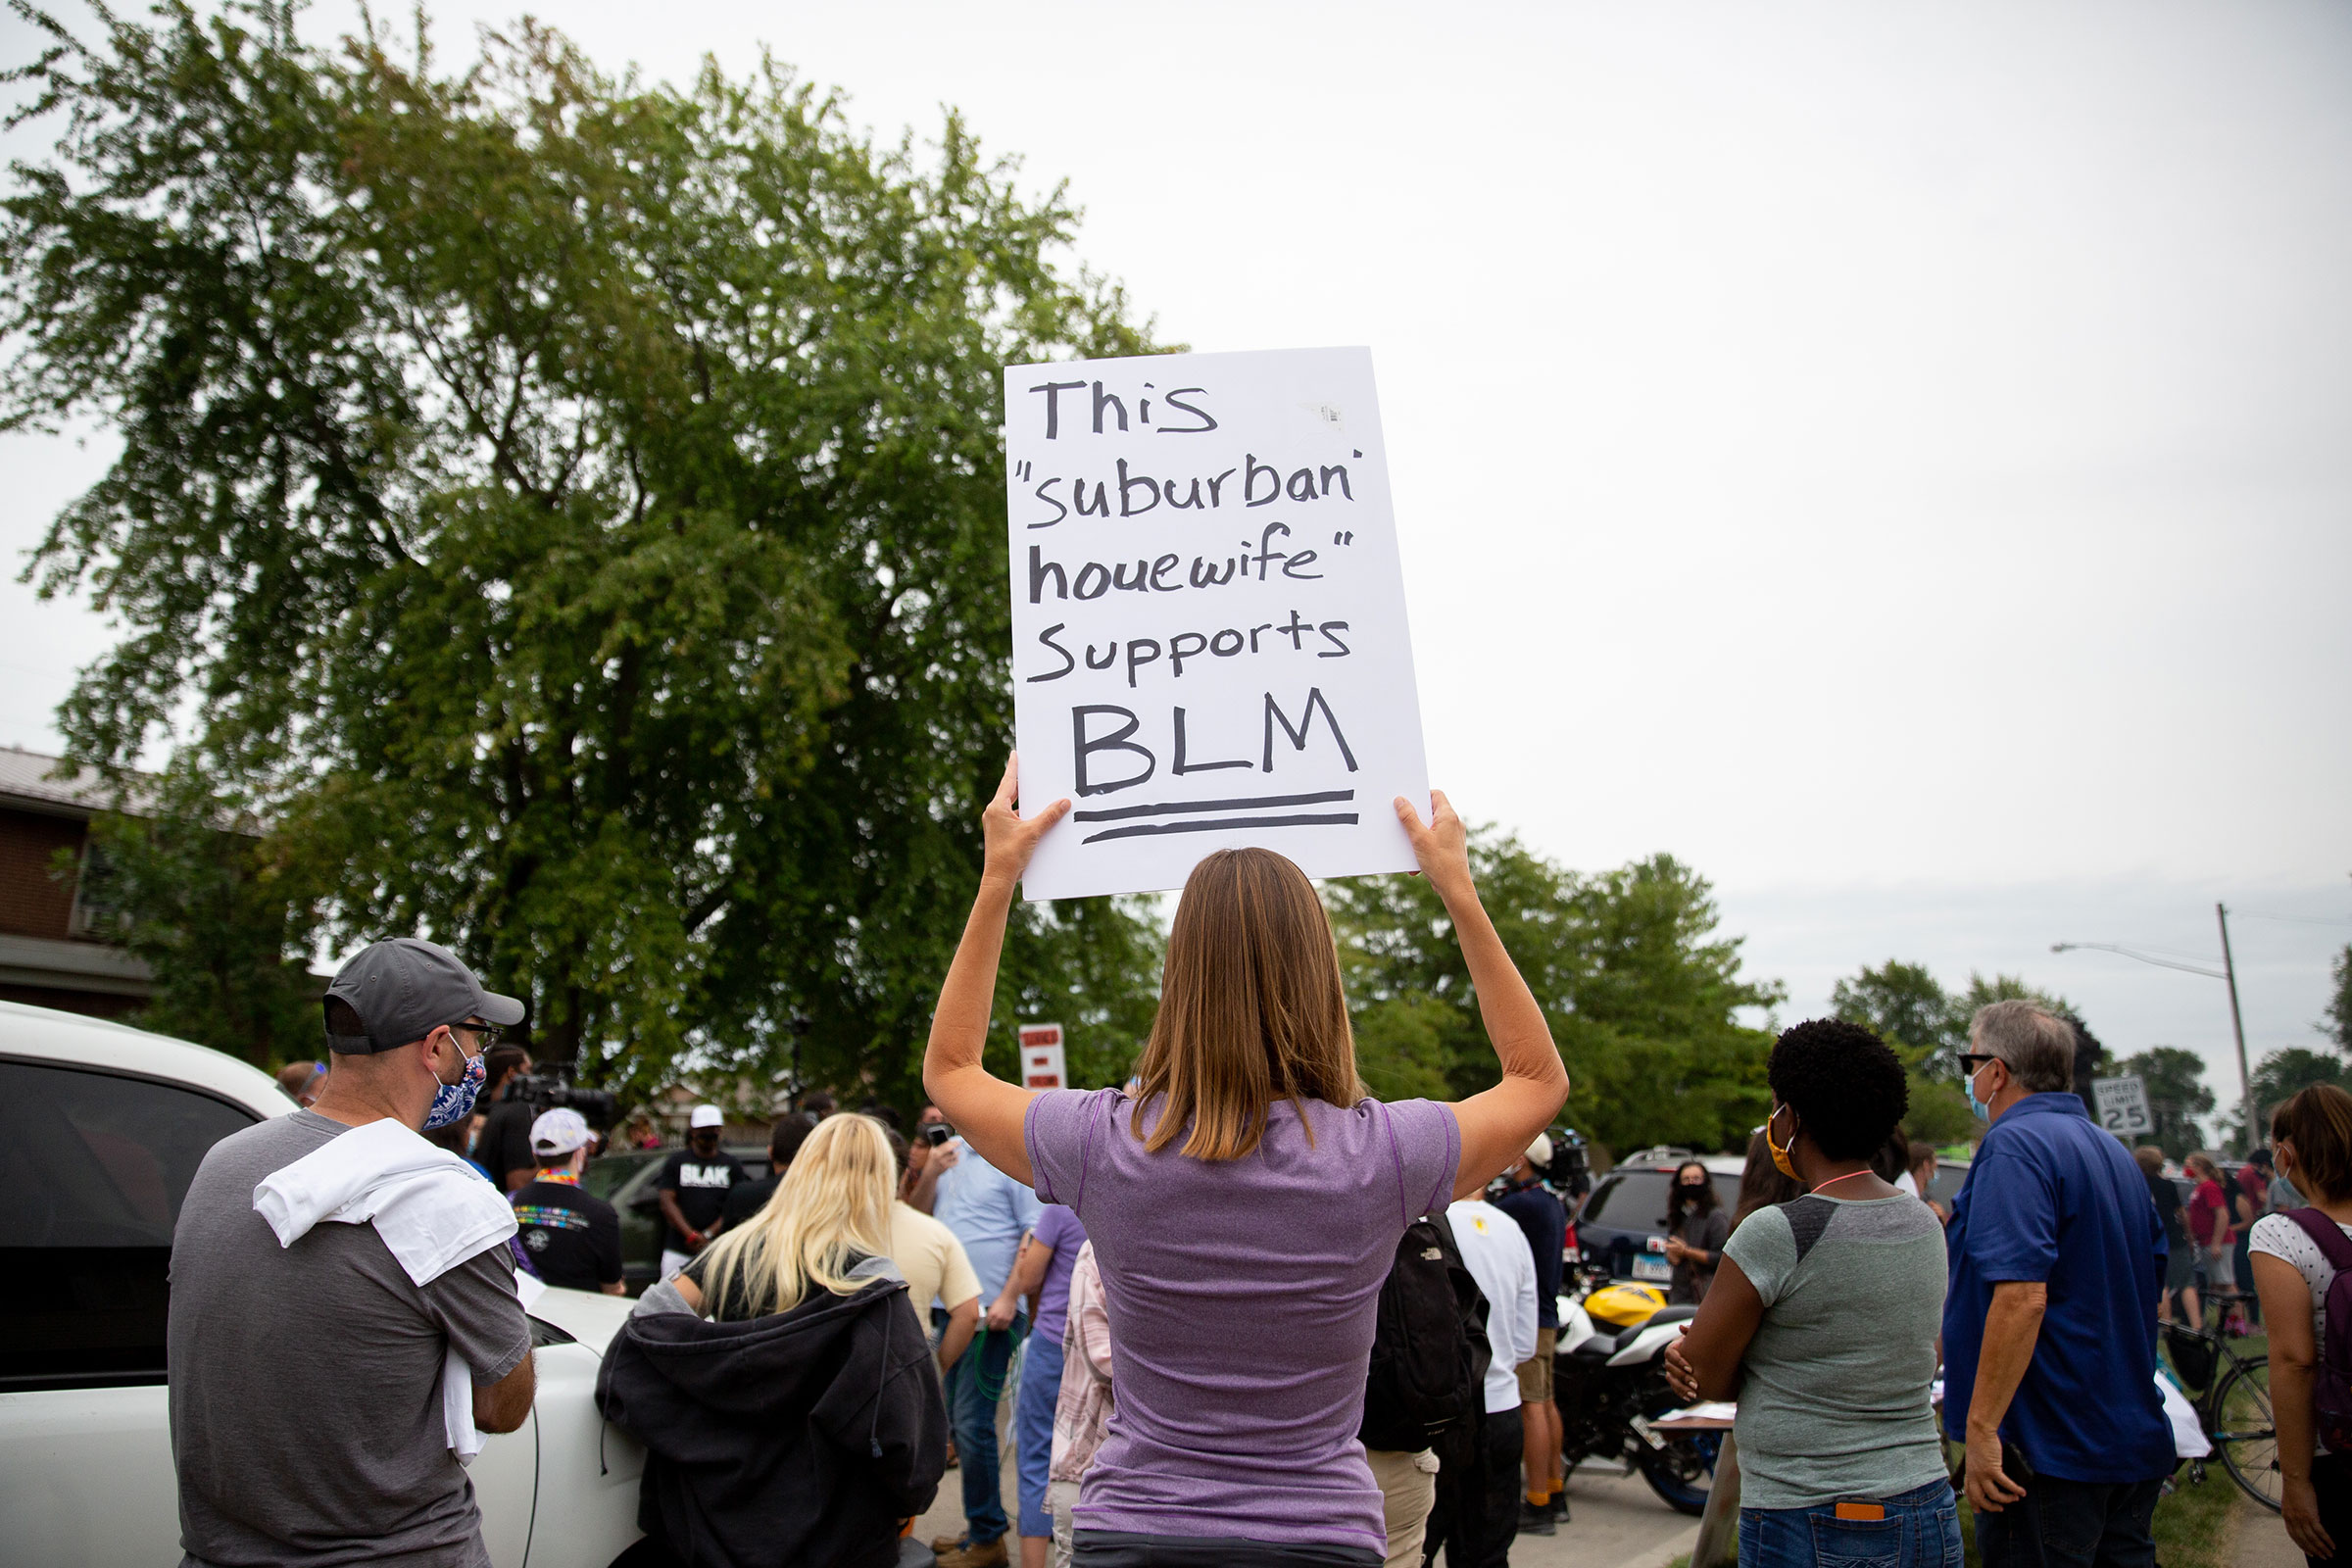 A supporter of Jacob Blake’s family holds a sign up at a peaceful gathering near the site where Blake was shot by police in Kenosha, Wis., on Tuesday Sept. 1, 2020. (Patience Zalanga for TIME)